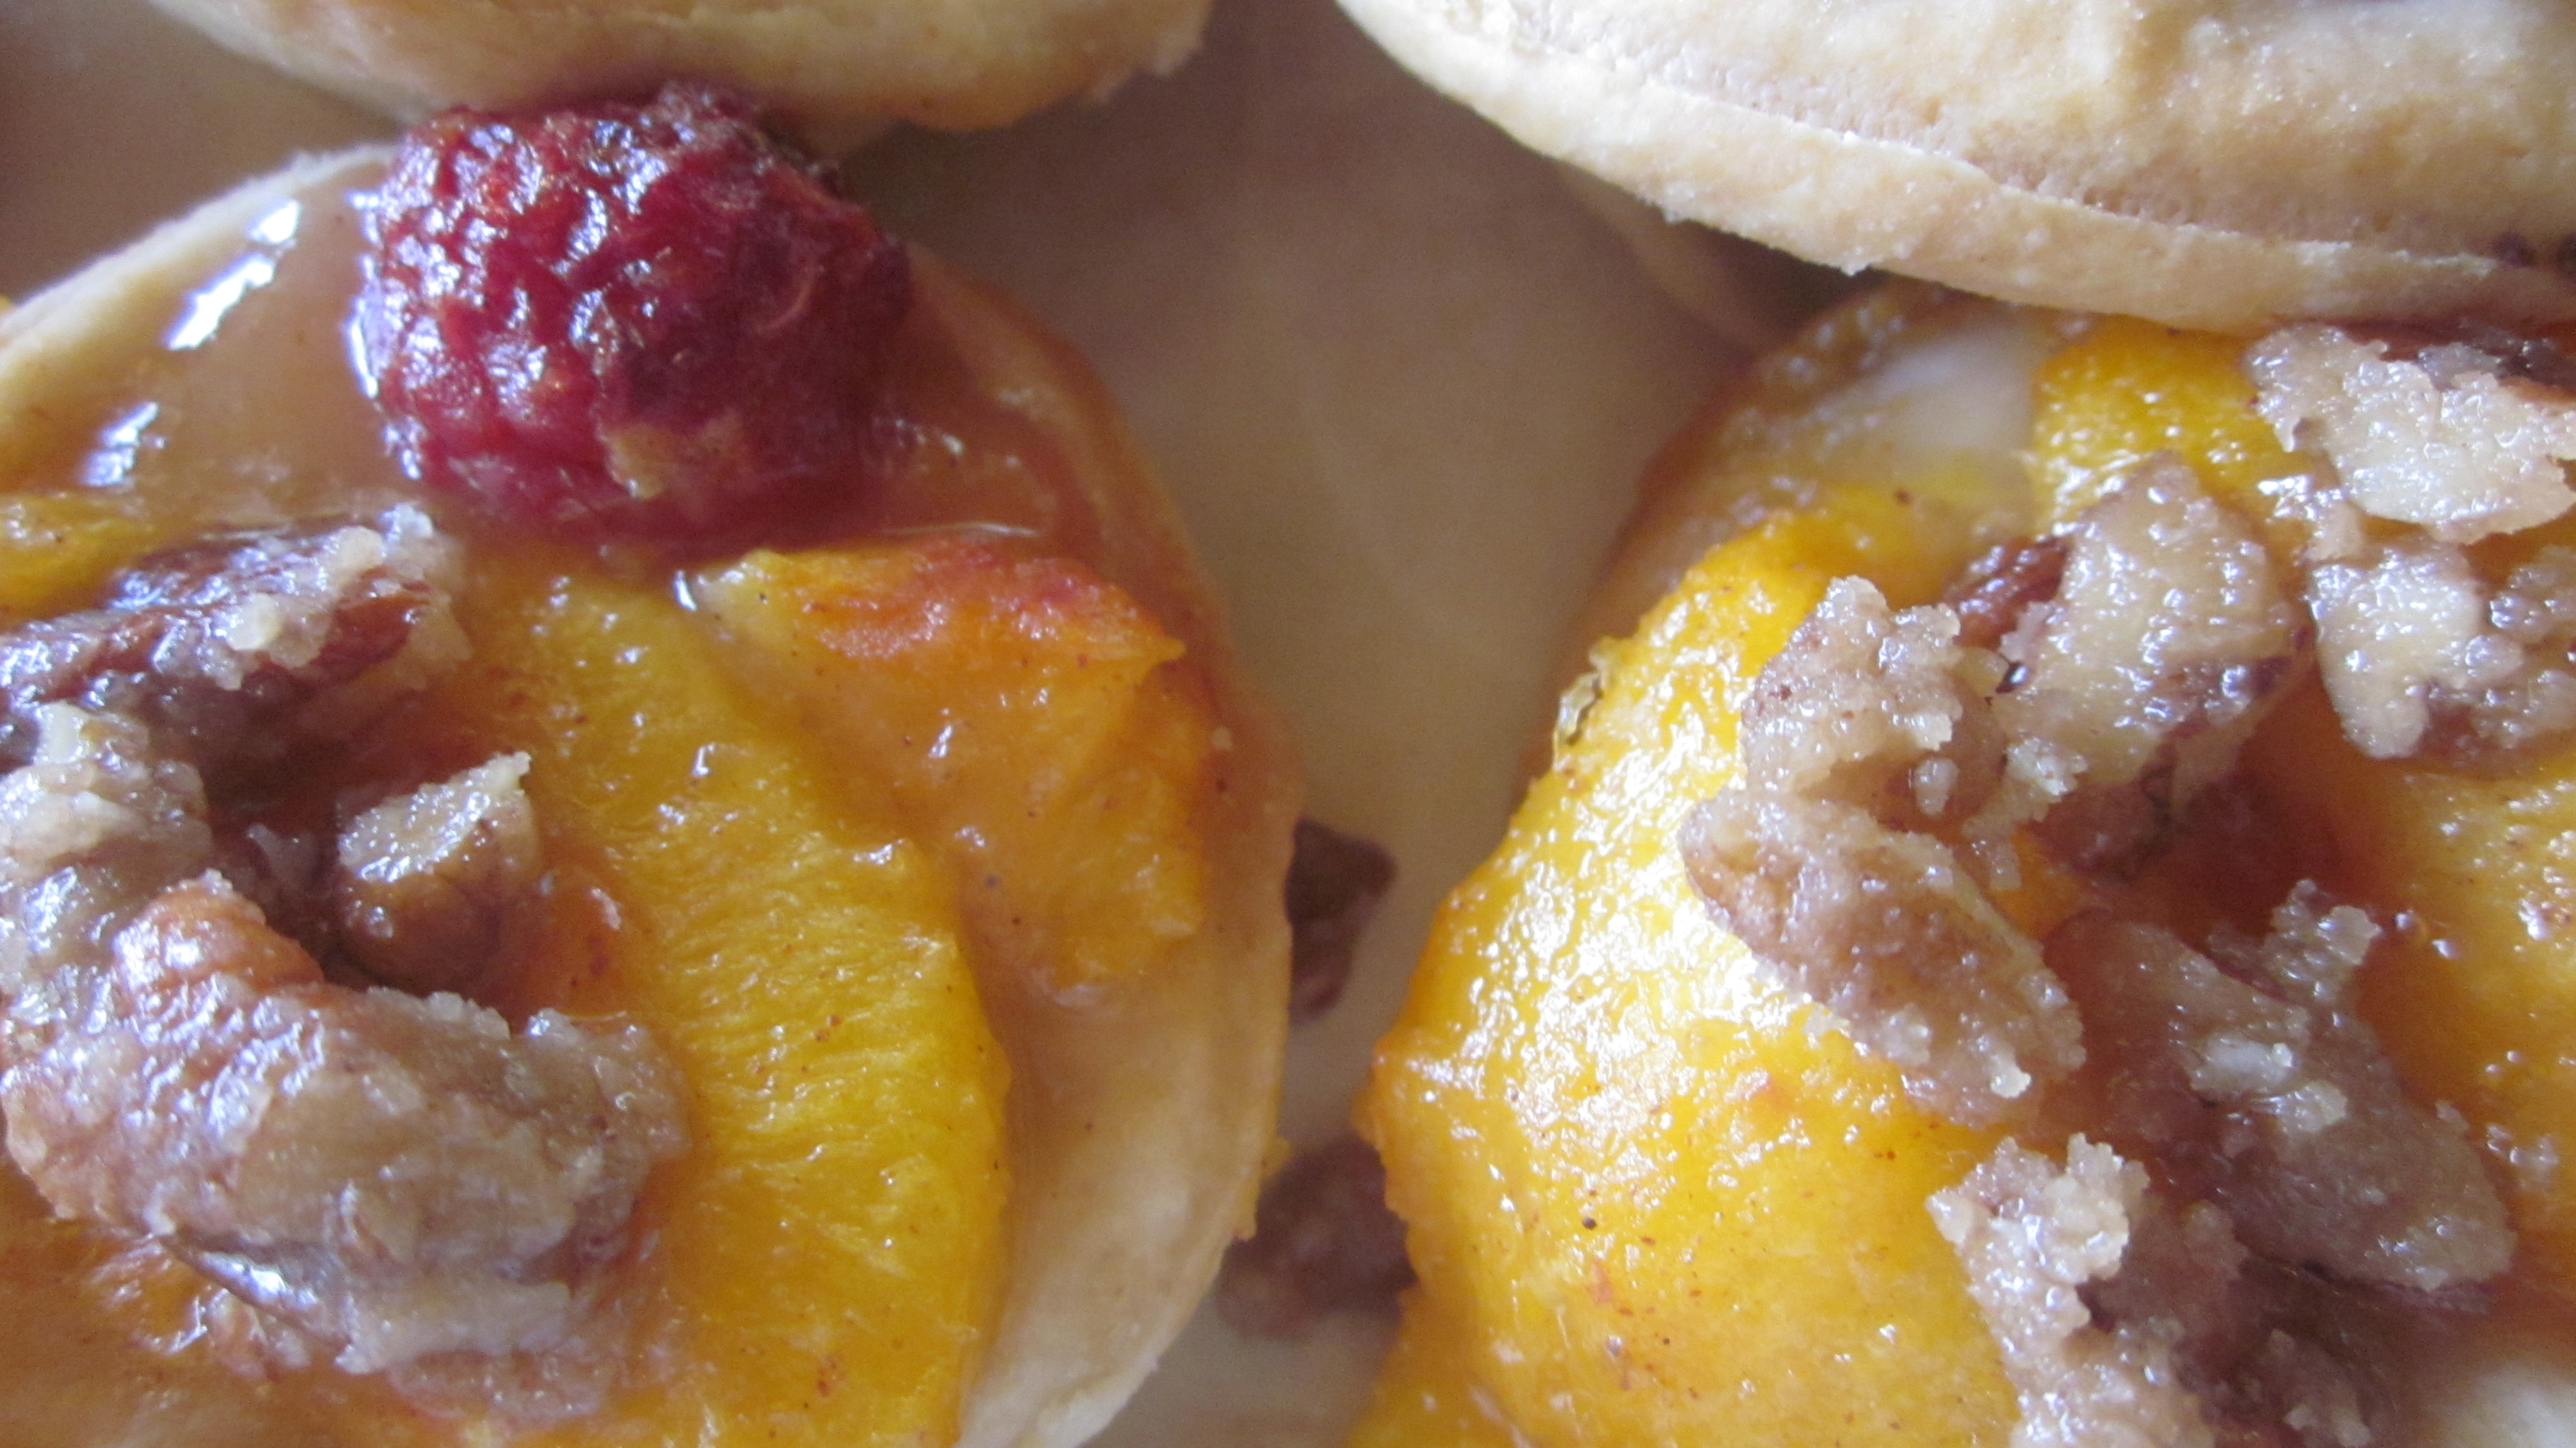 Peach and Raspberry Tartlets with candied pecans, oh my!